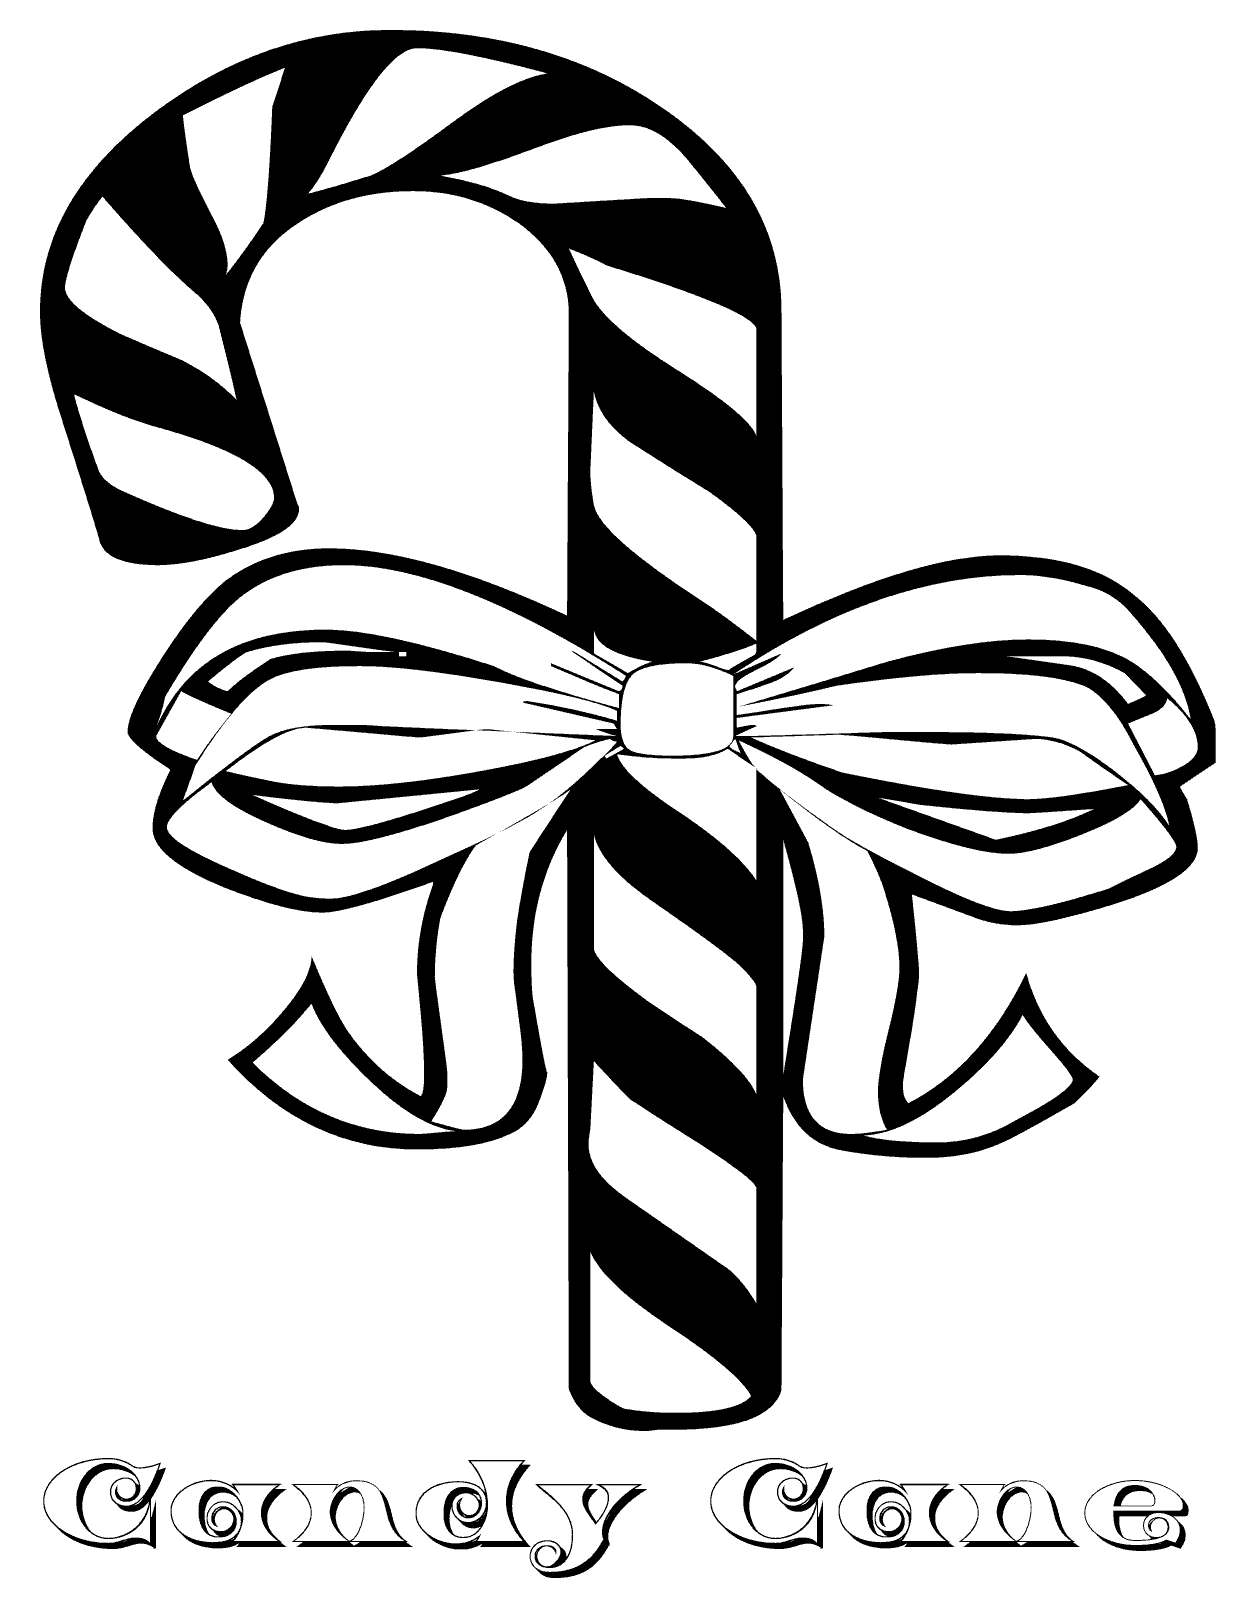 Candy Cane Coloring Page Free Printable